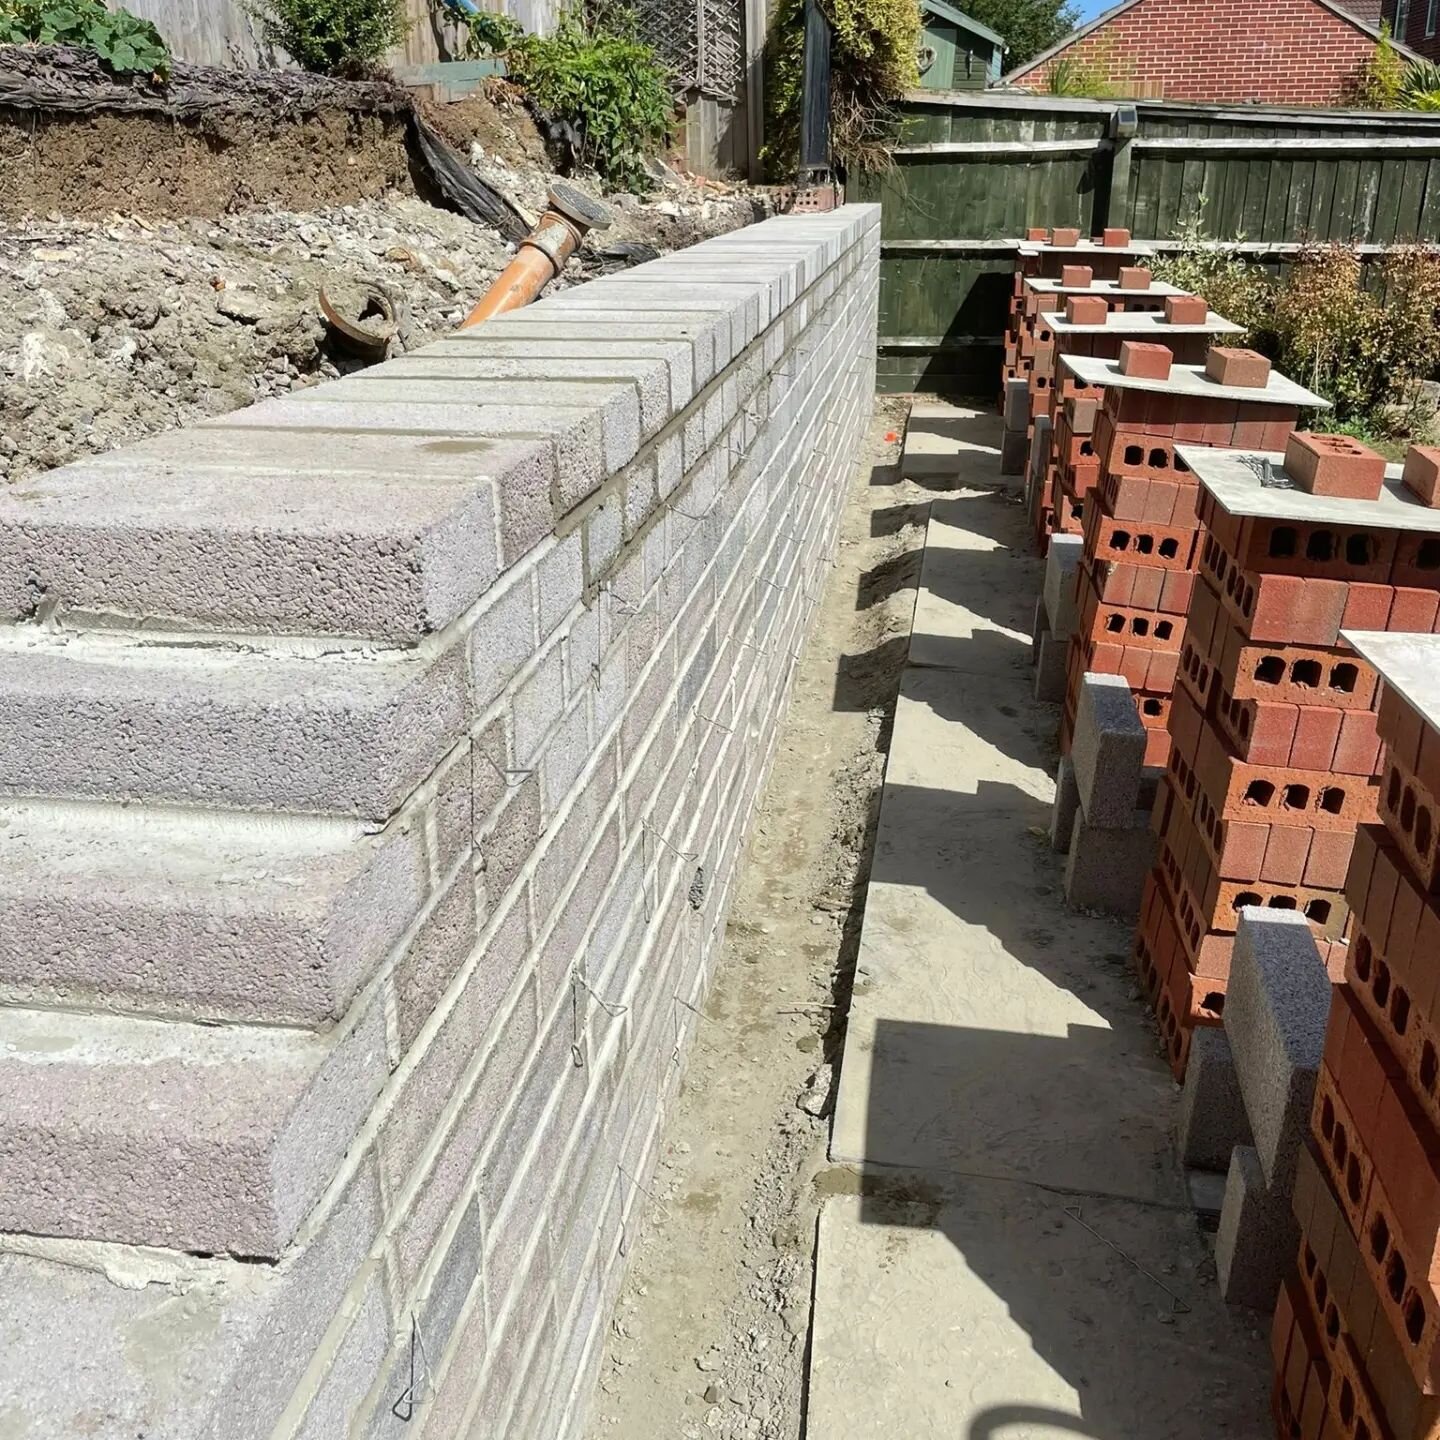 🟠 Garden Project in Combwich 🟠

The team are making good progress 👍🏻 on a garden wall project in Combwich. 

We were asked to dismantle a falling retaining garden wall and rebuild. We took down the wall and laid new foundations with reinforcement